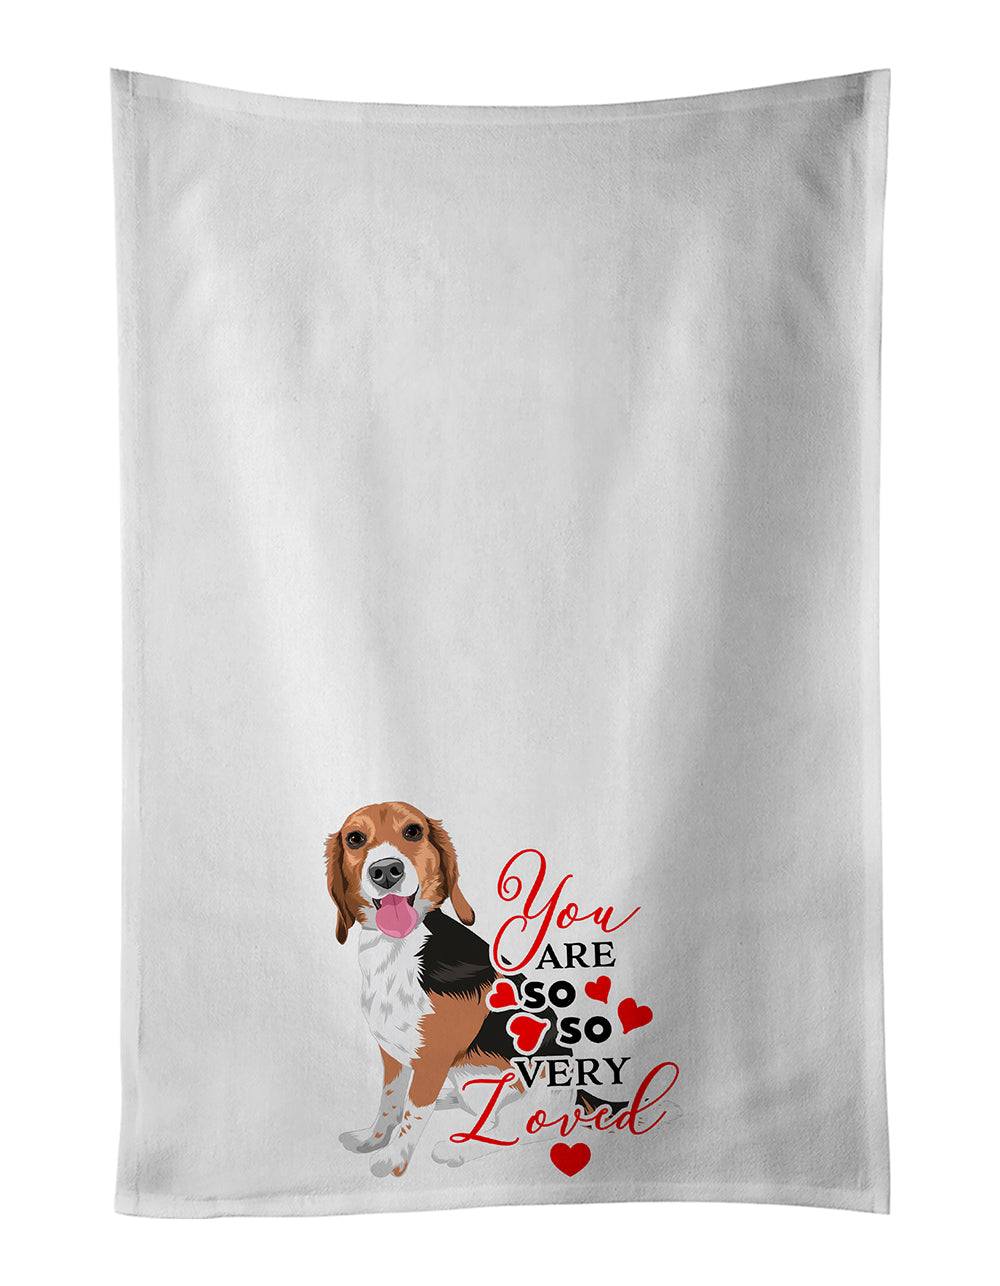 Buy this Beagle Tricolor Red Ticked #1 so Loved White Kitchen Towel Set of 2